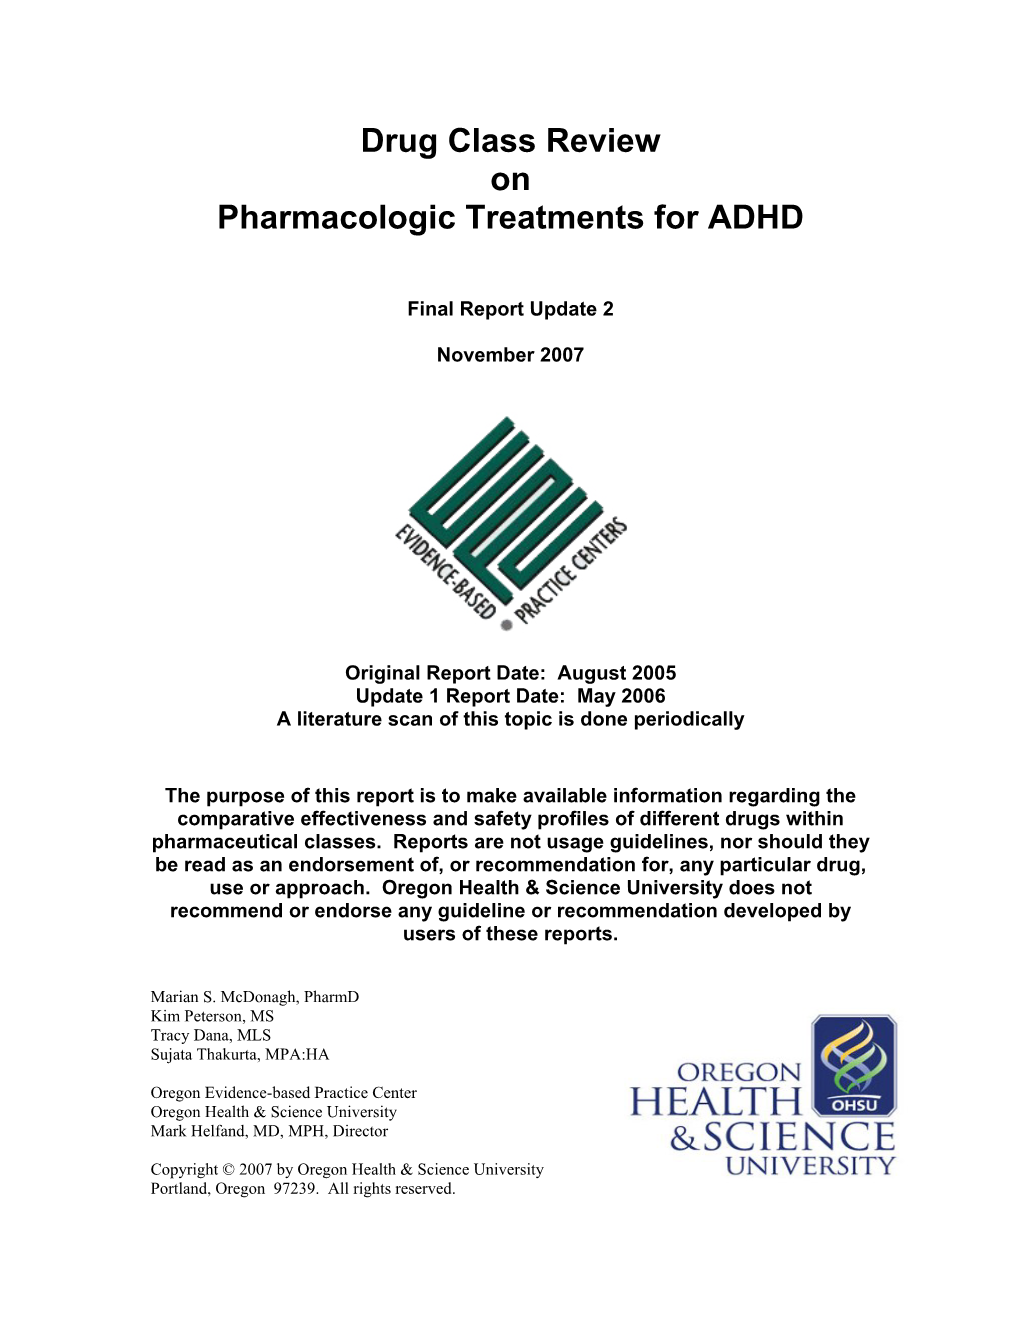 Drug Class Review on Pharmacologic Treatments for ADHD